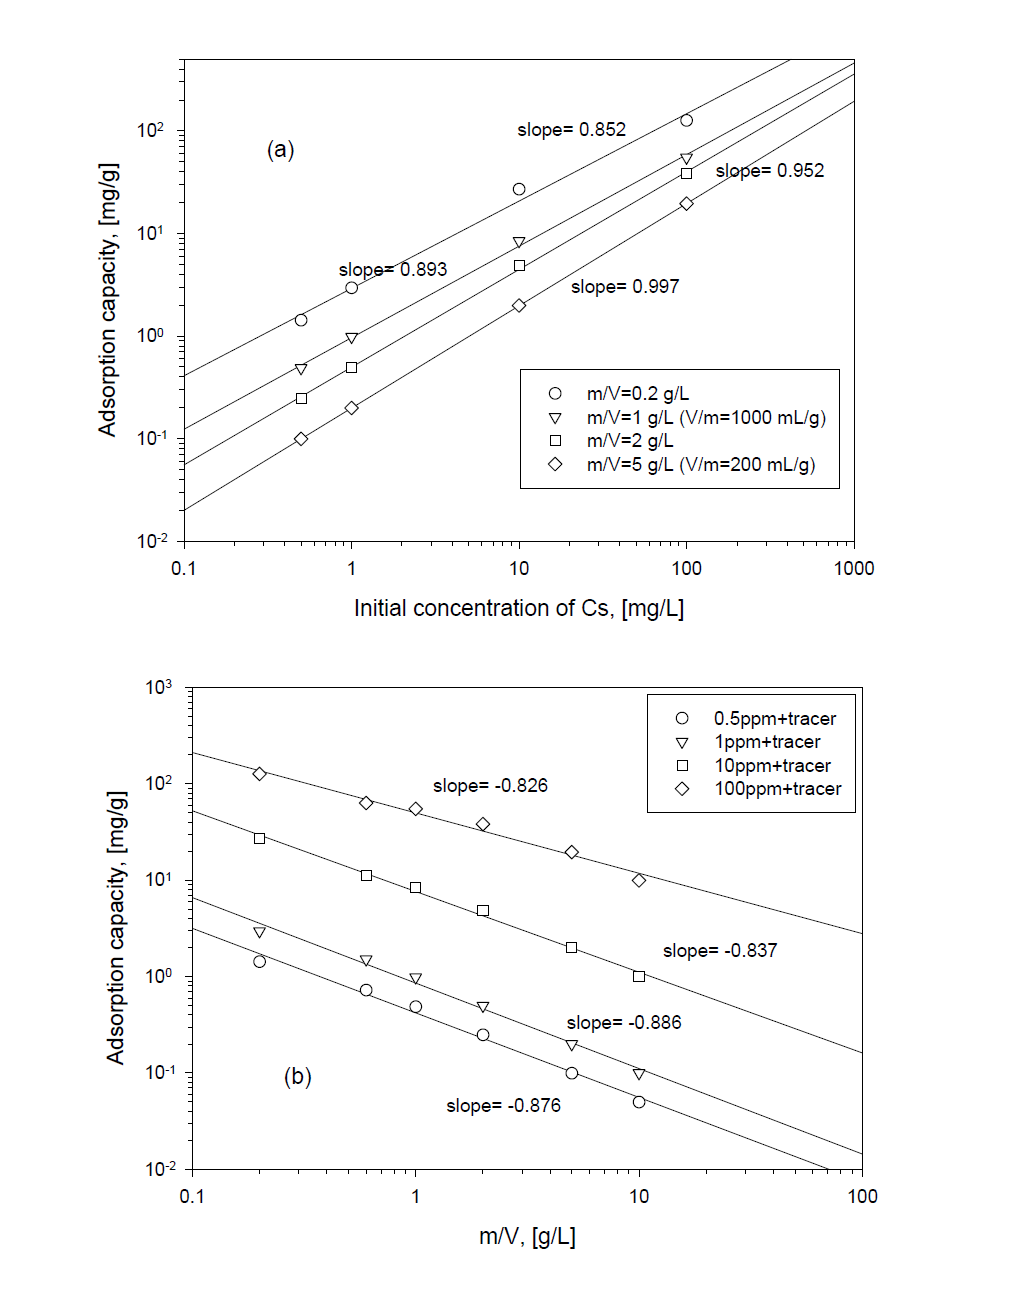 Adsorption capacity of Cs by IE911 silicotitanate with initial concentration of Cs (a) and ratio of m/V (b).